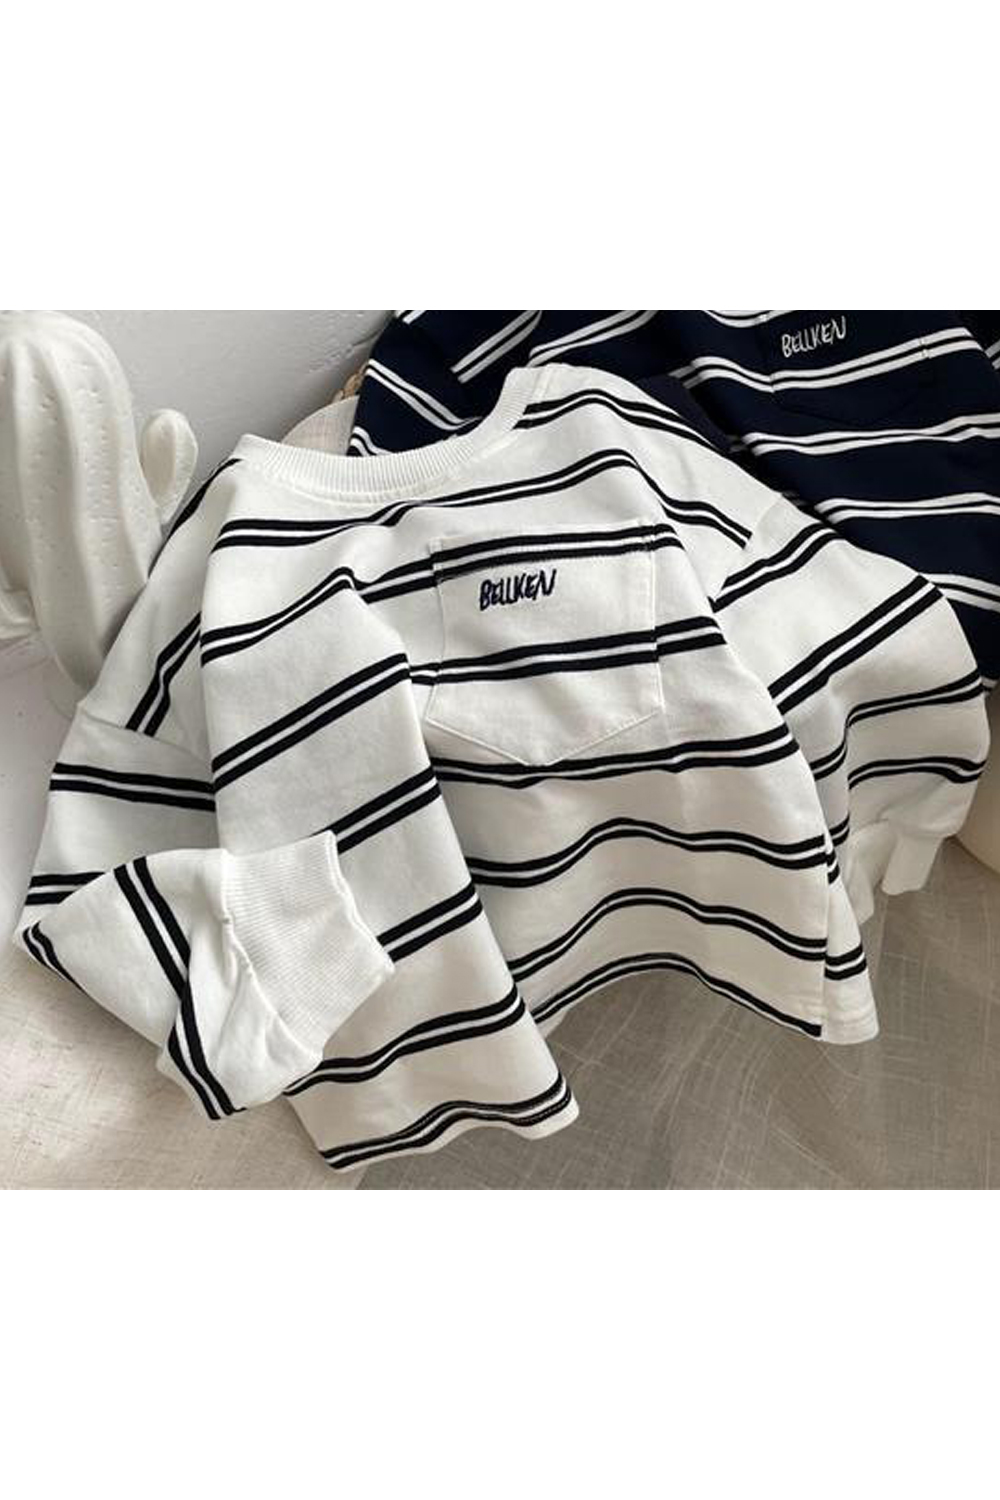 Selected Color is White Simple Striped Sweater YQ2210